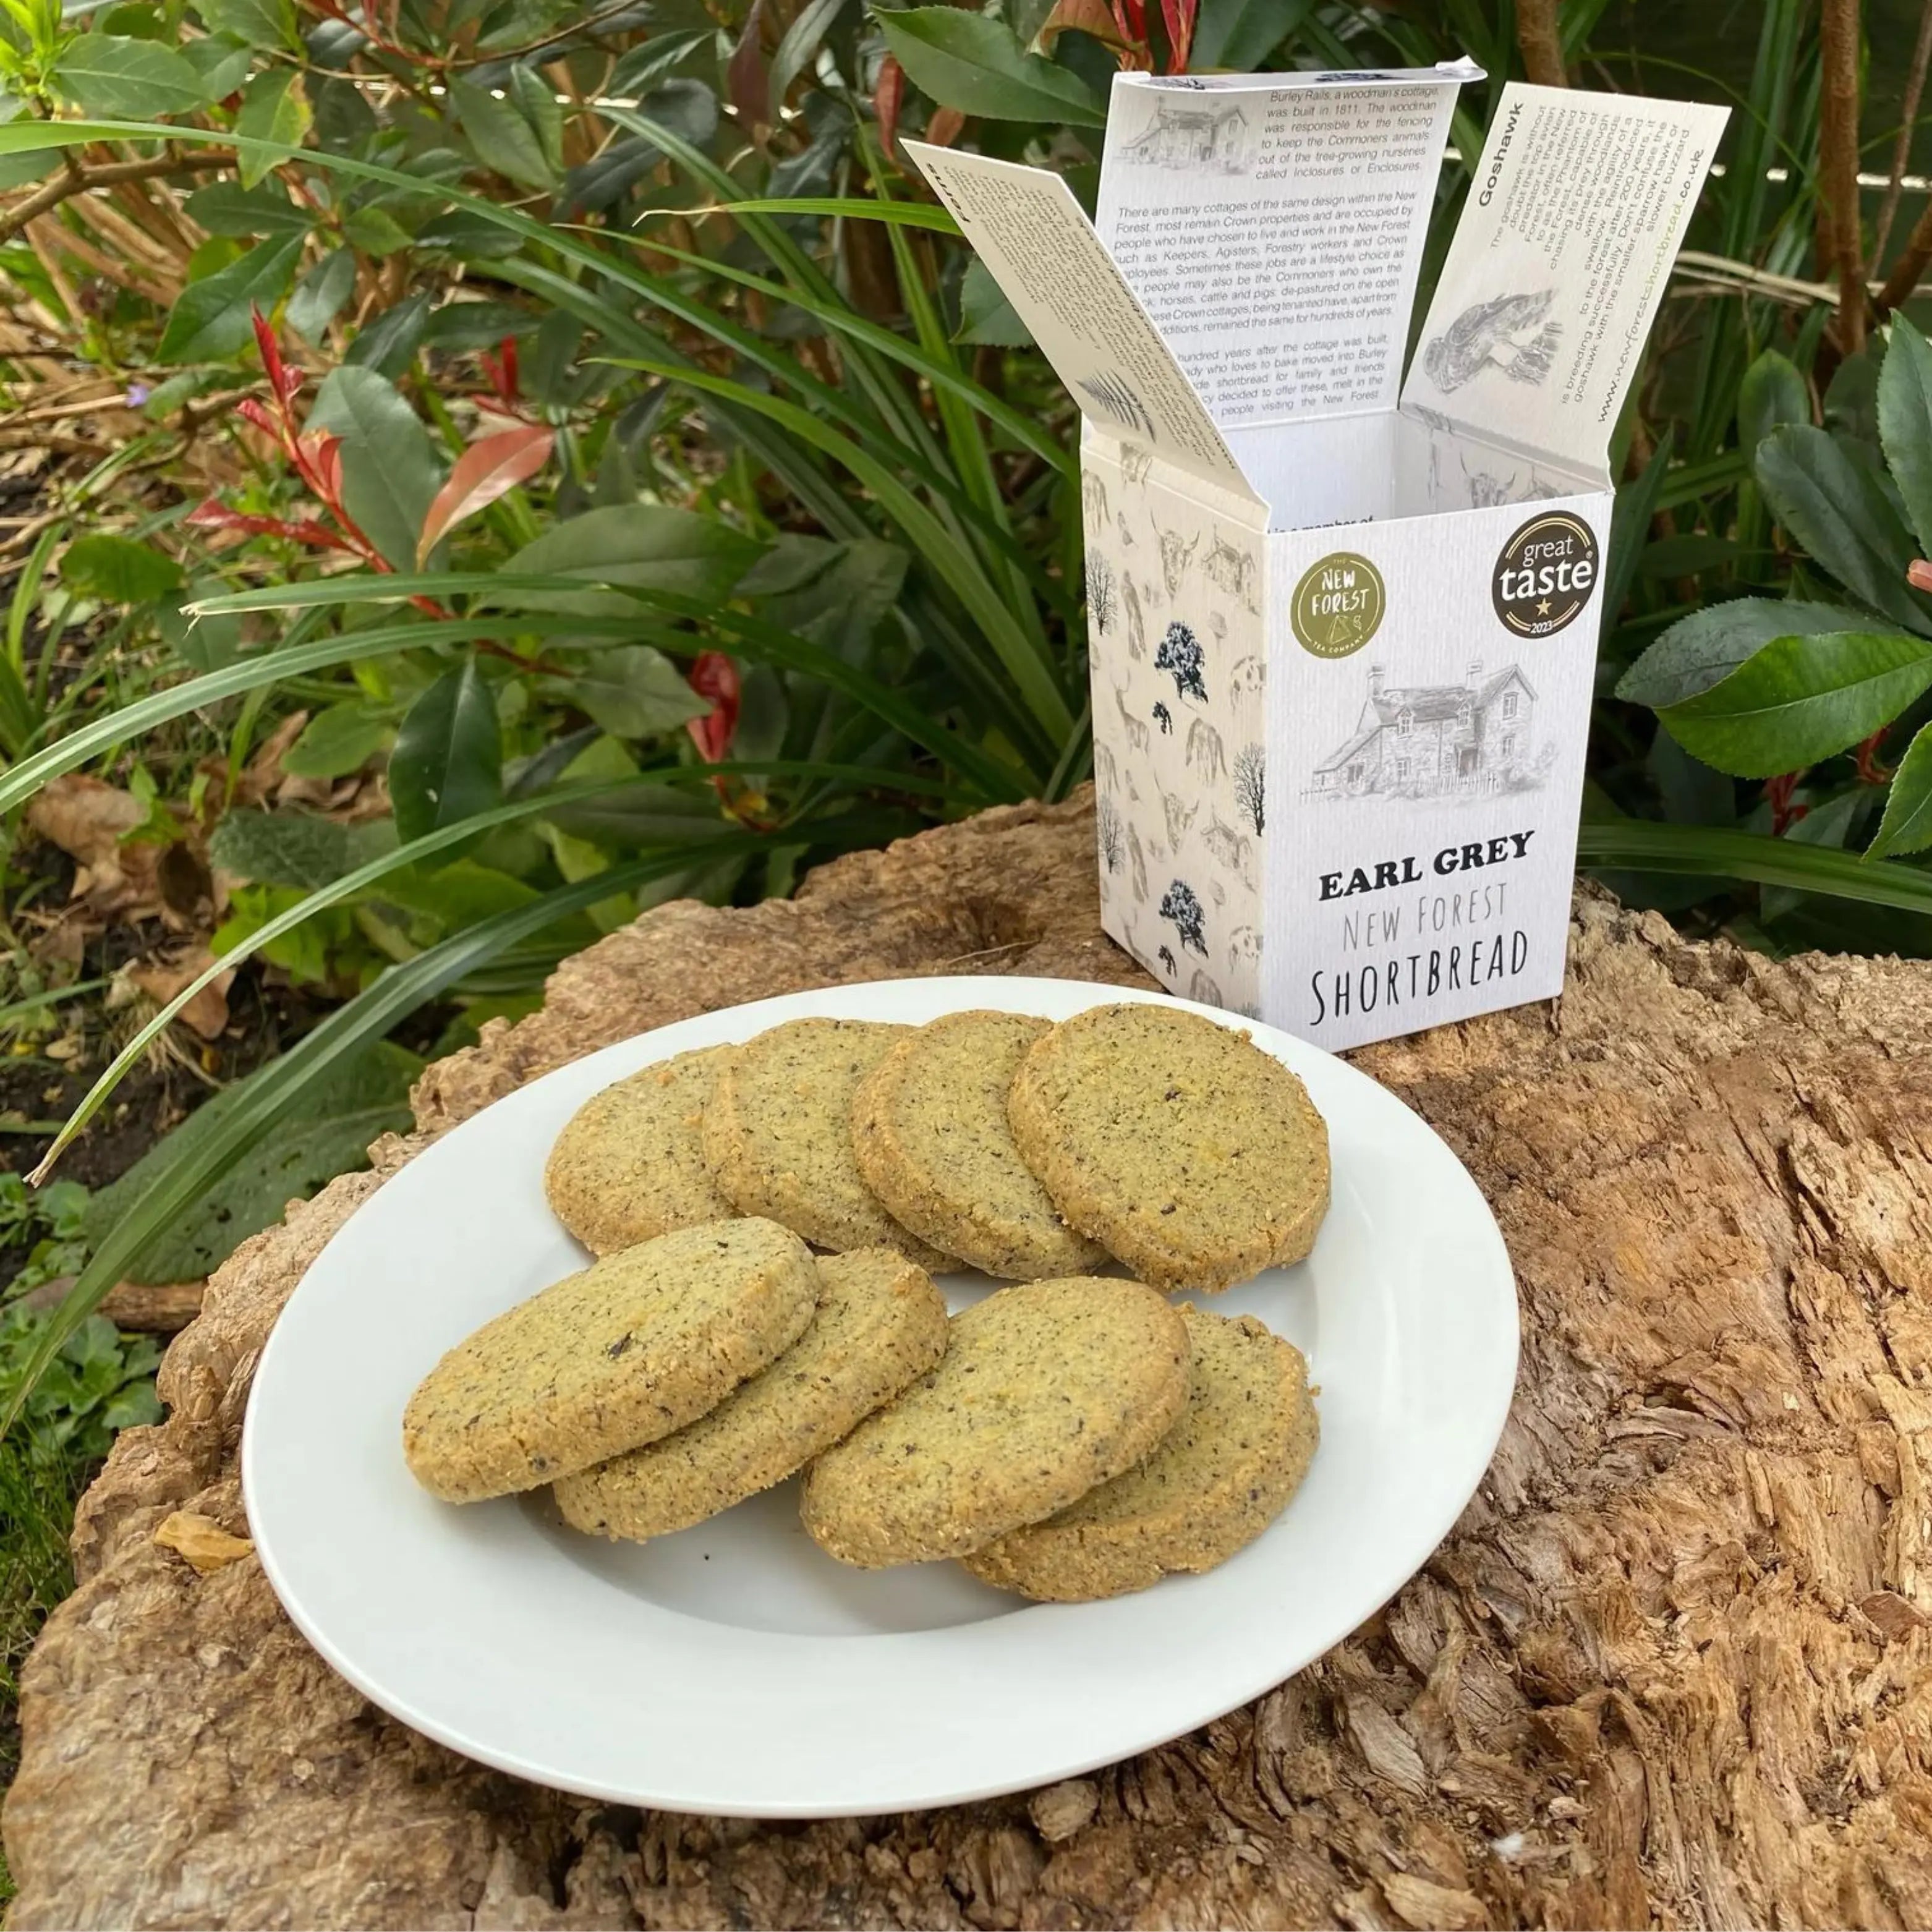 Earl Grey-infused shortbread: delicate, buttery cookies with a hint of bergamot, perfect for tea time indulgence.